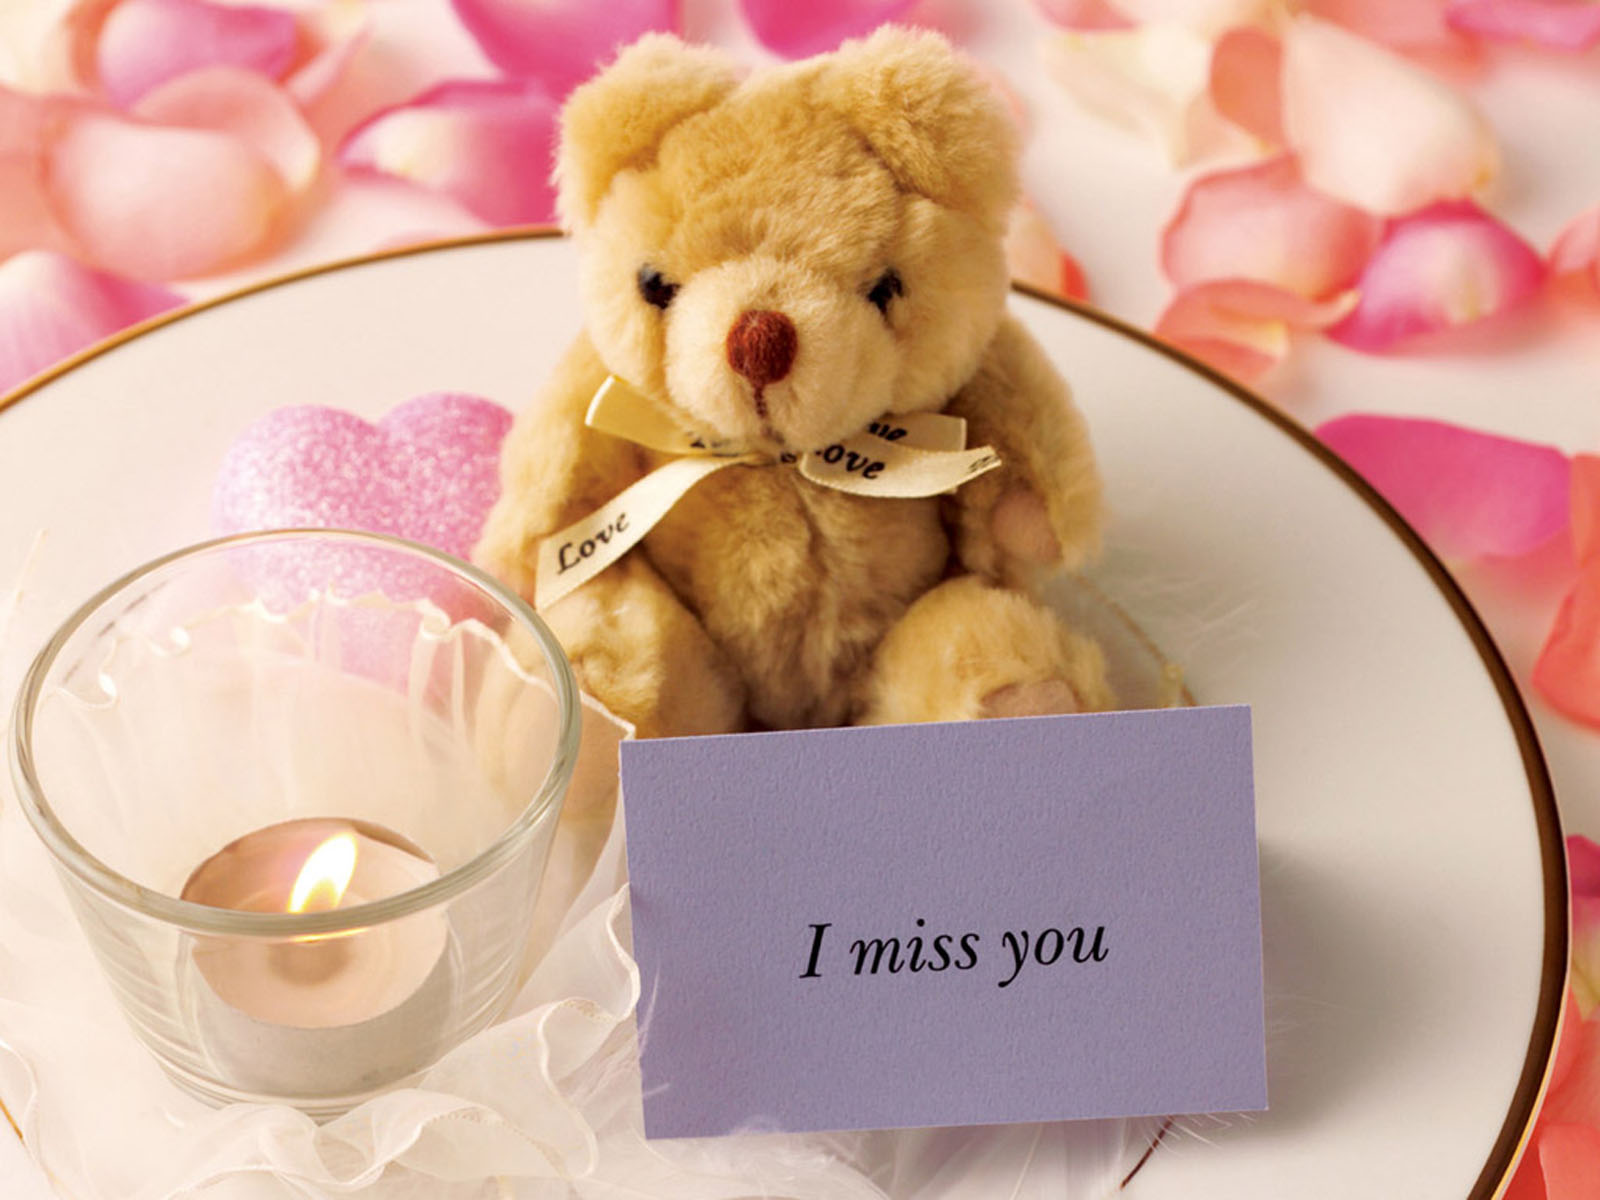 i miss you wallpaper,teddy bear,pink,stuffed toy,party favor,toy